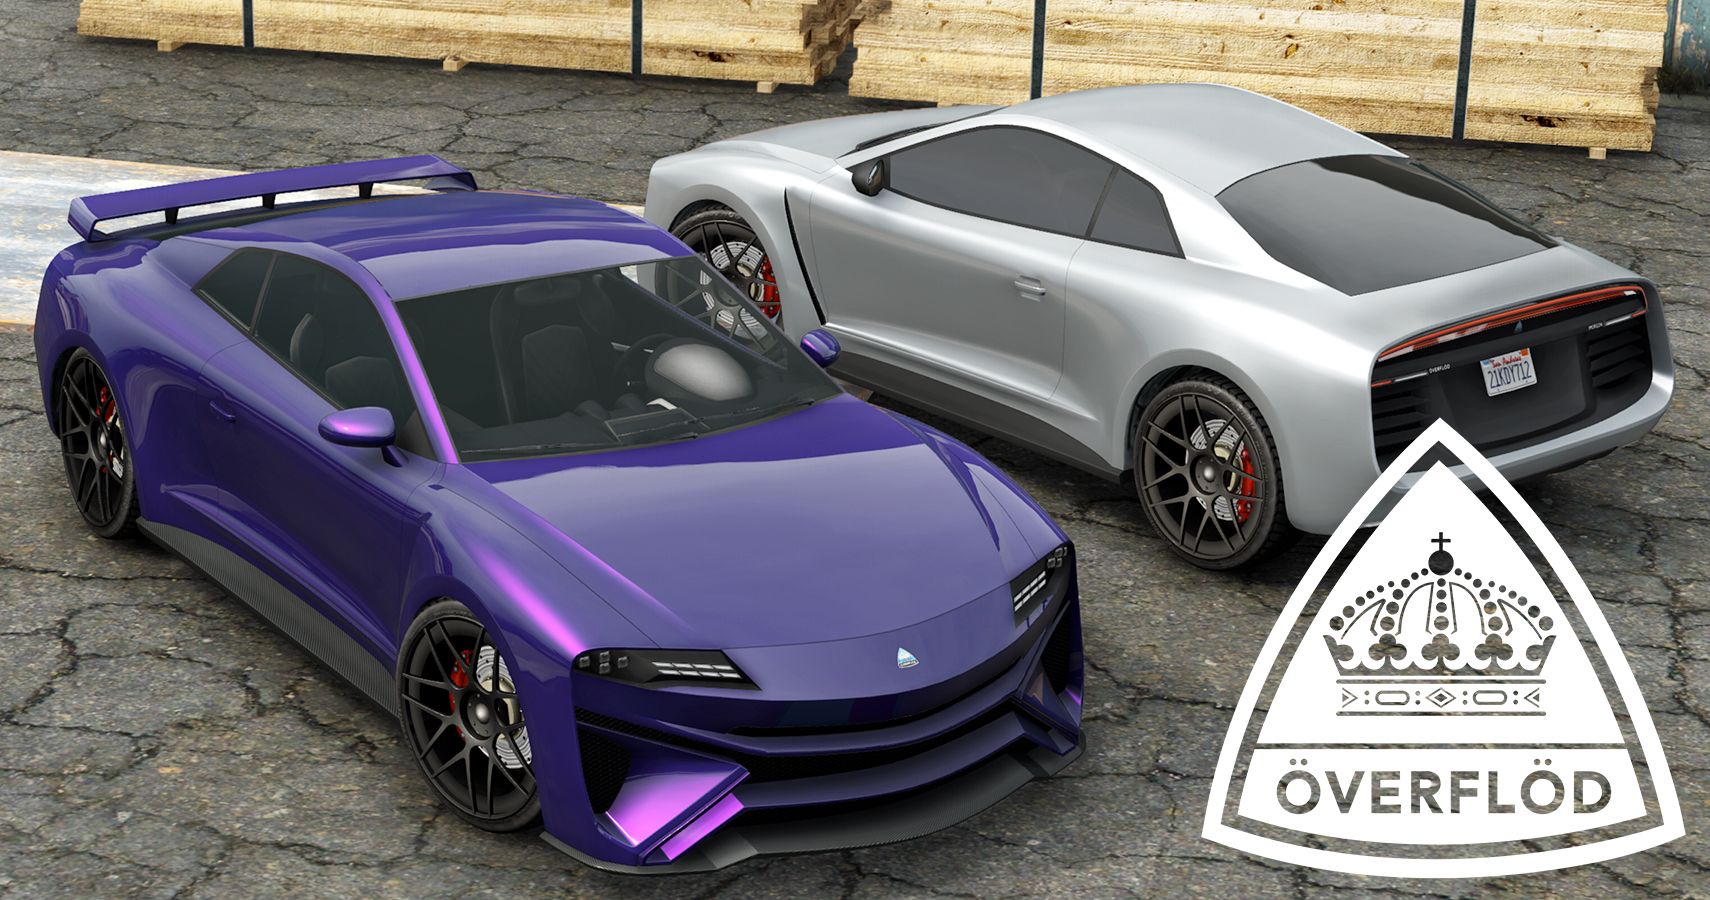 Fastest Electric Car In Gta 5 2020 - Supercars Gallery